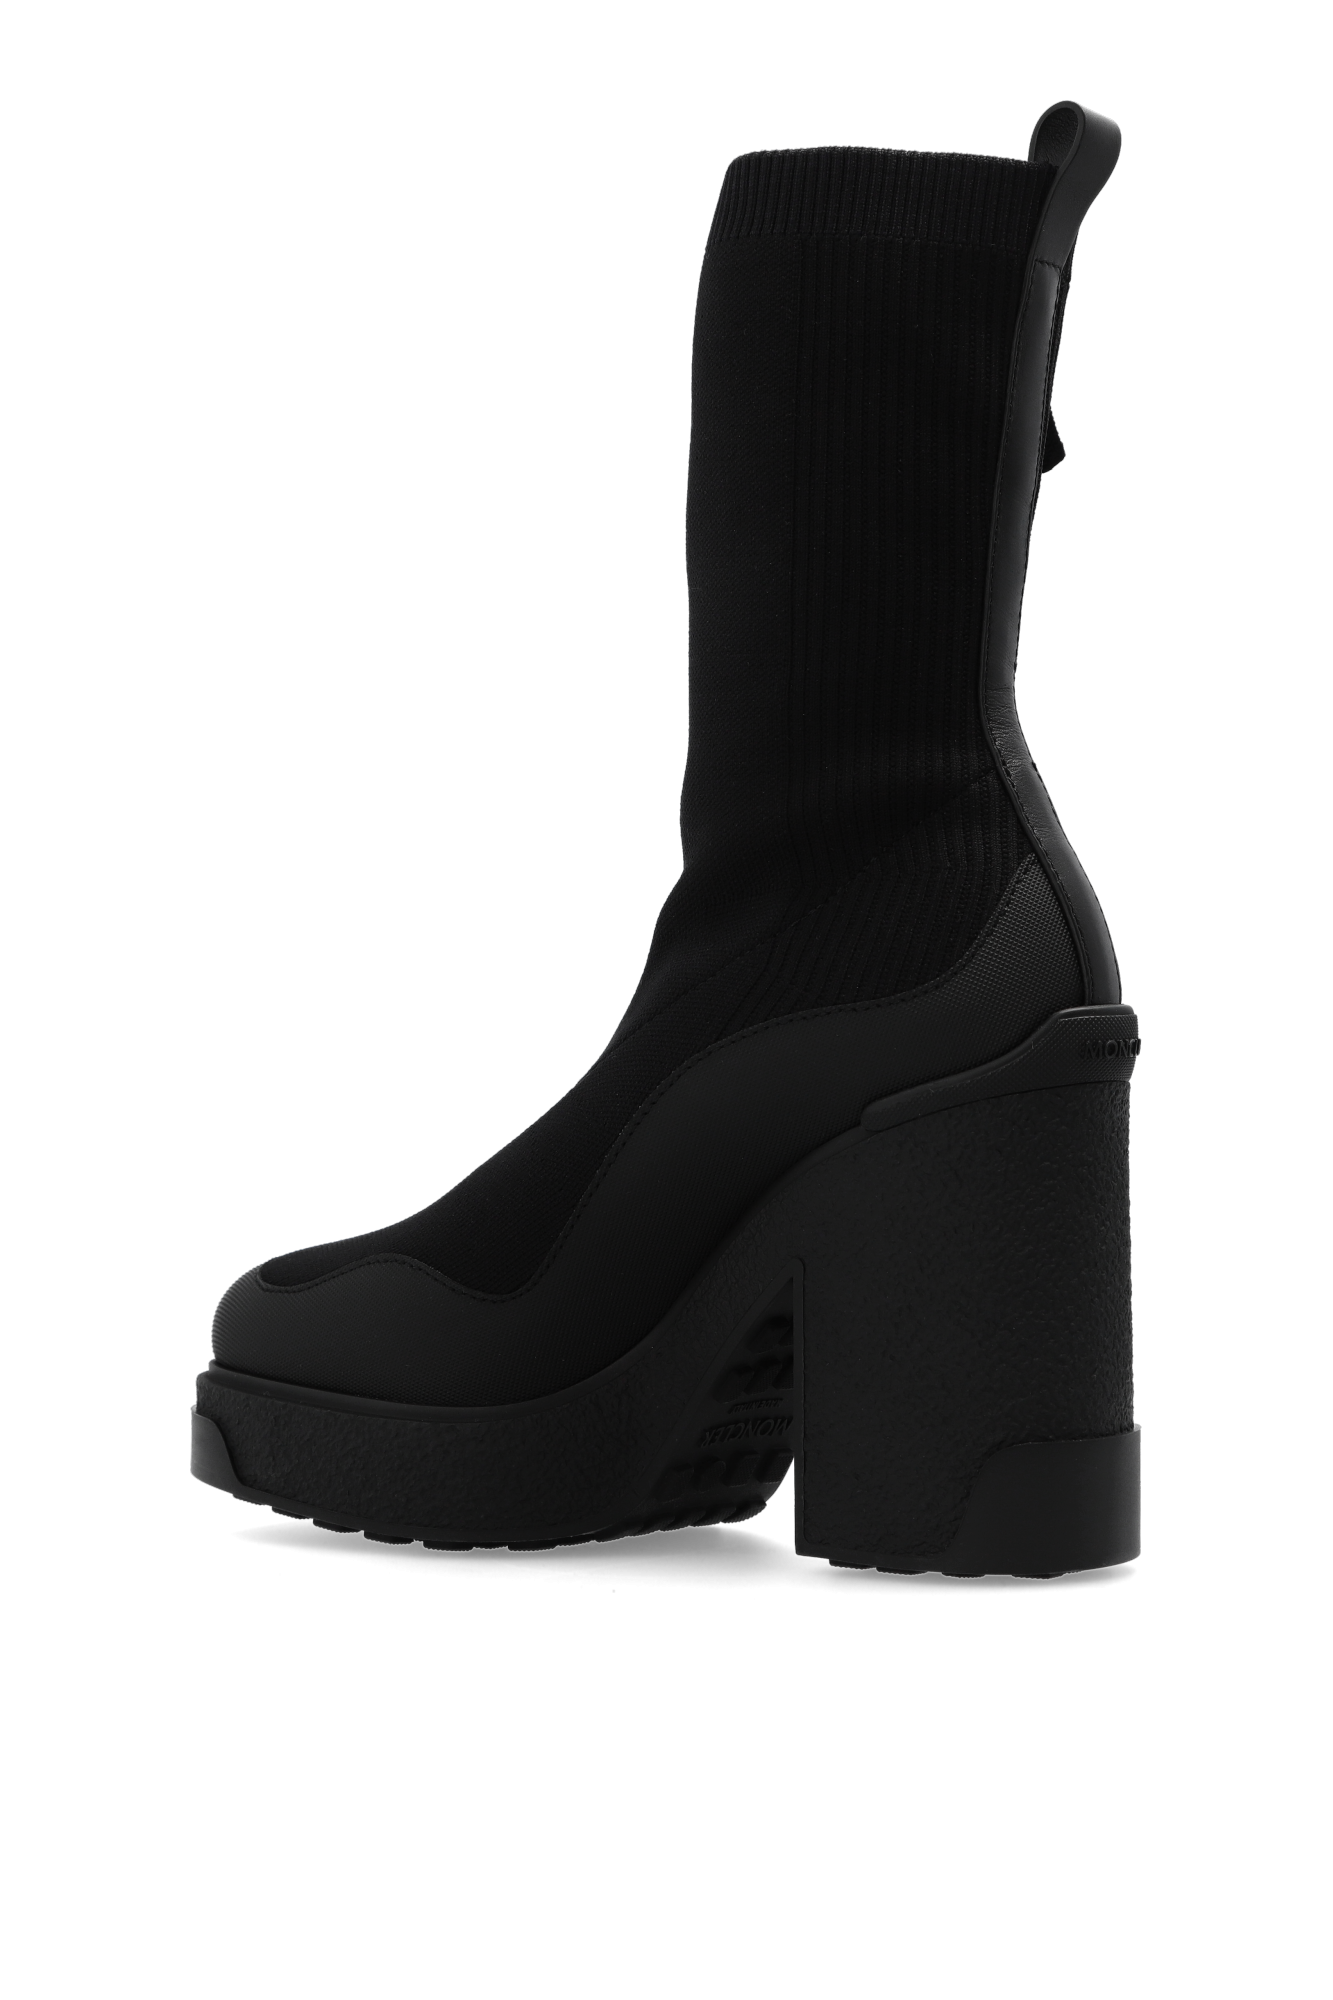 Moncler ‘Splora’ heeled ankle boots